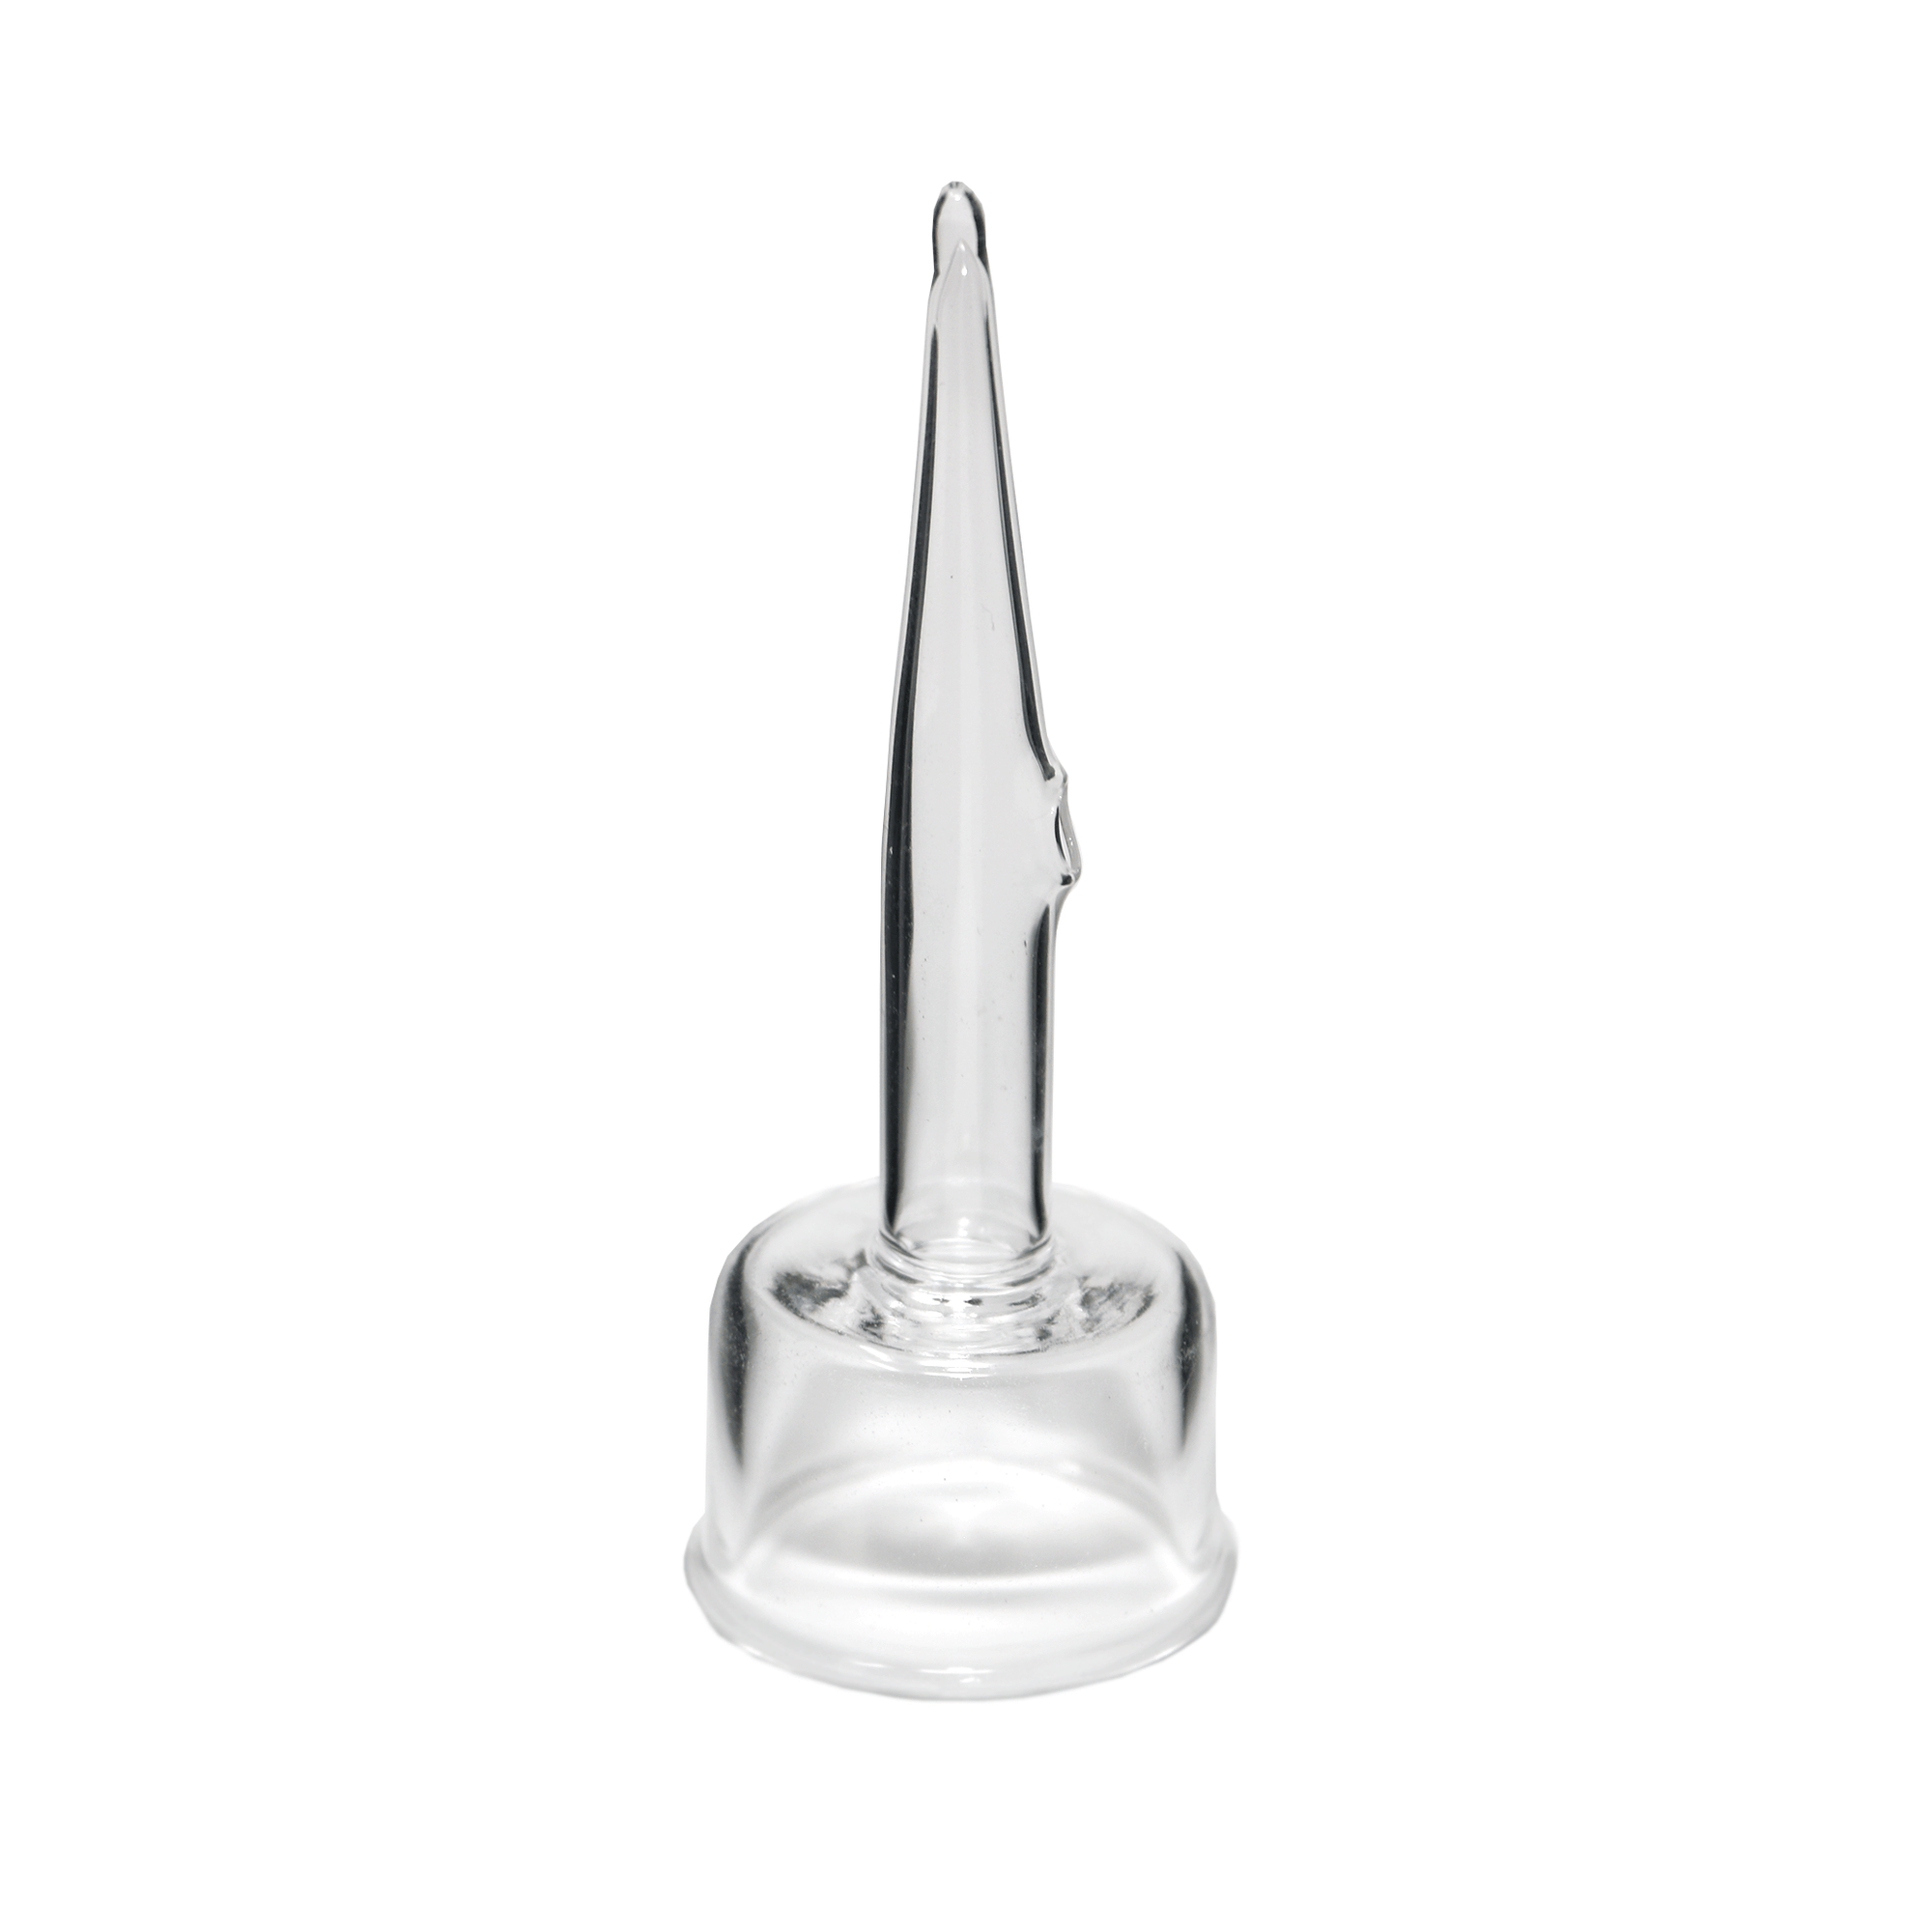 Carb Cap Dabber for Hybrid Nails | Profile View | Dabbing Warehouse